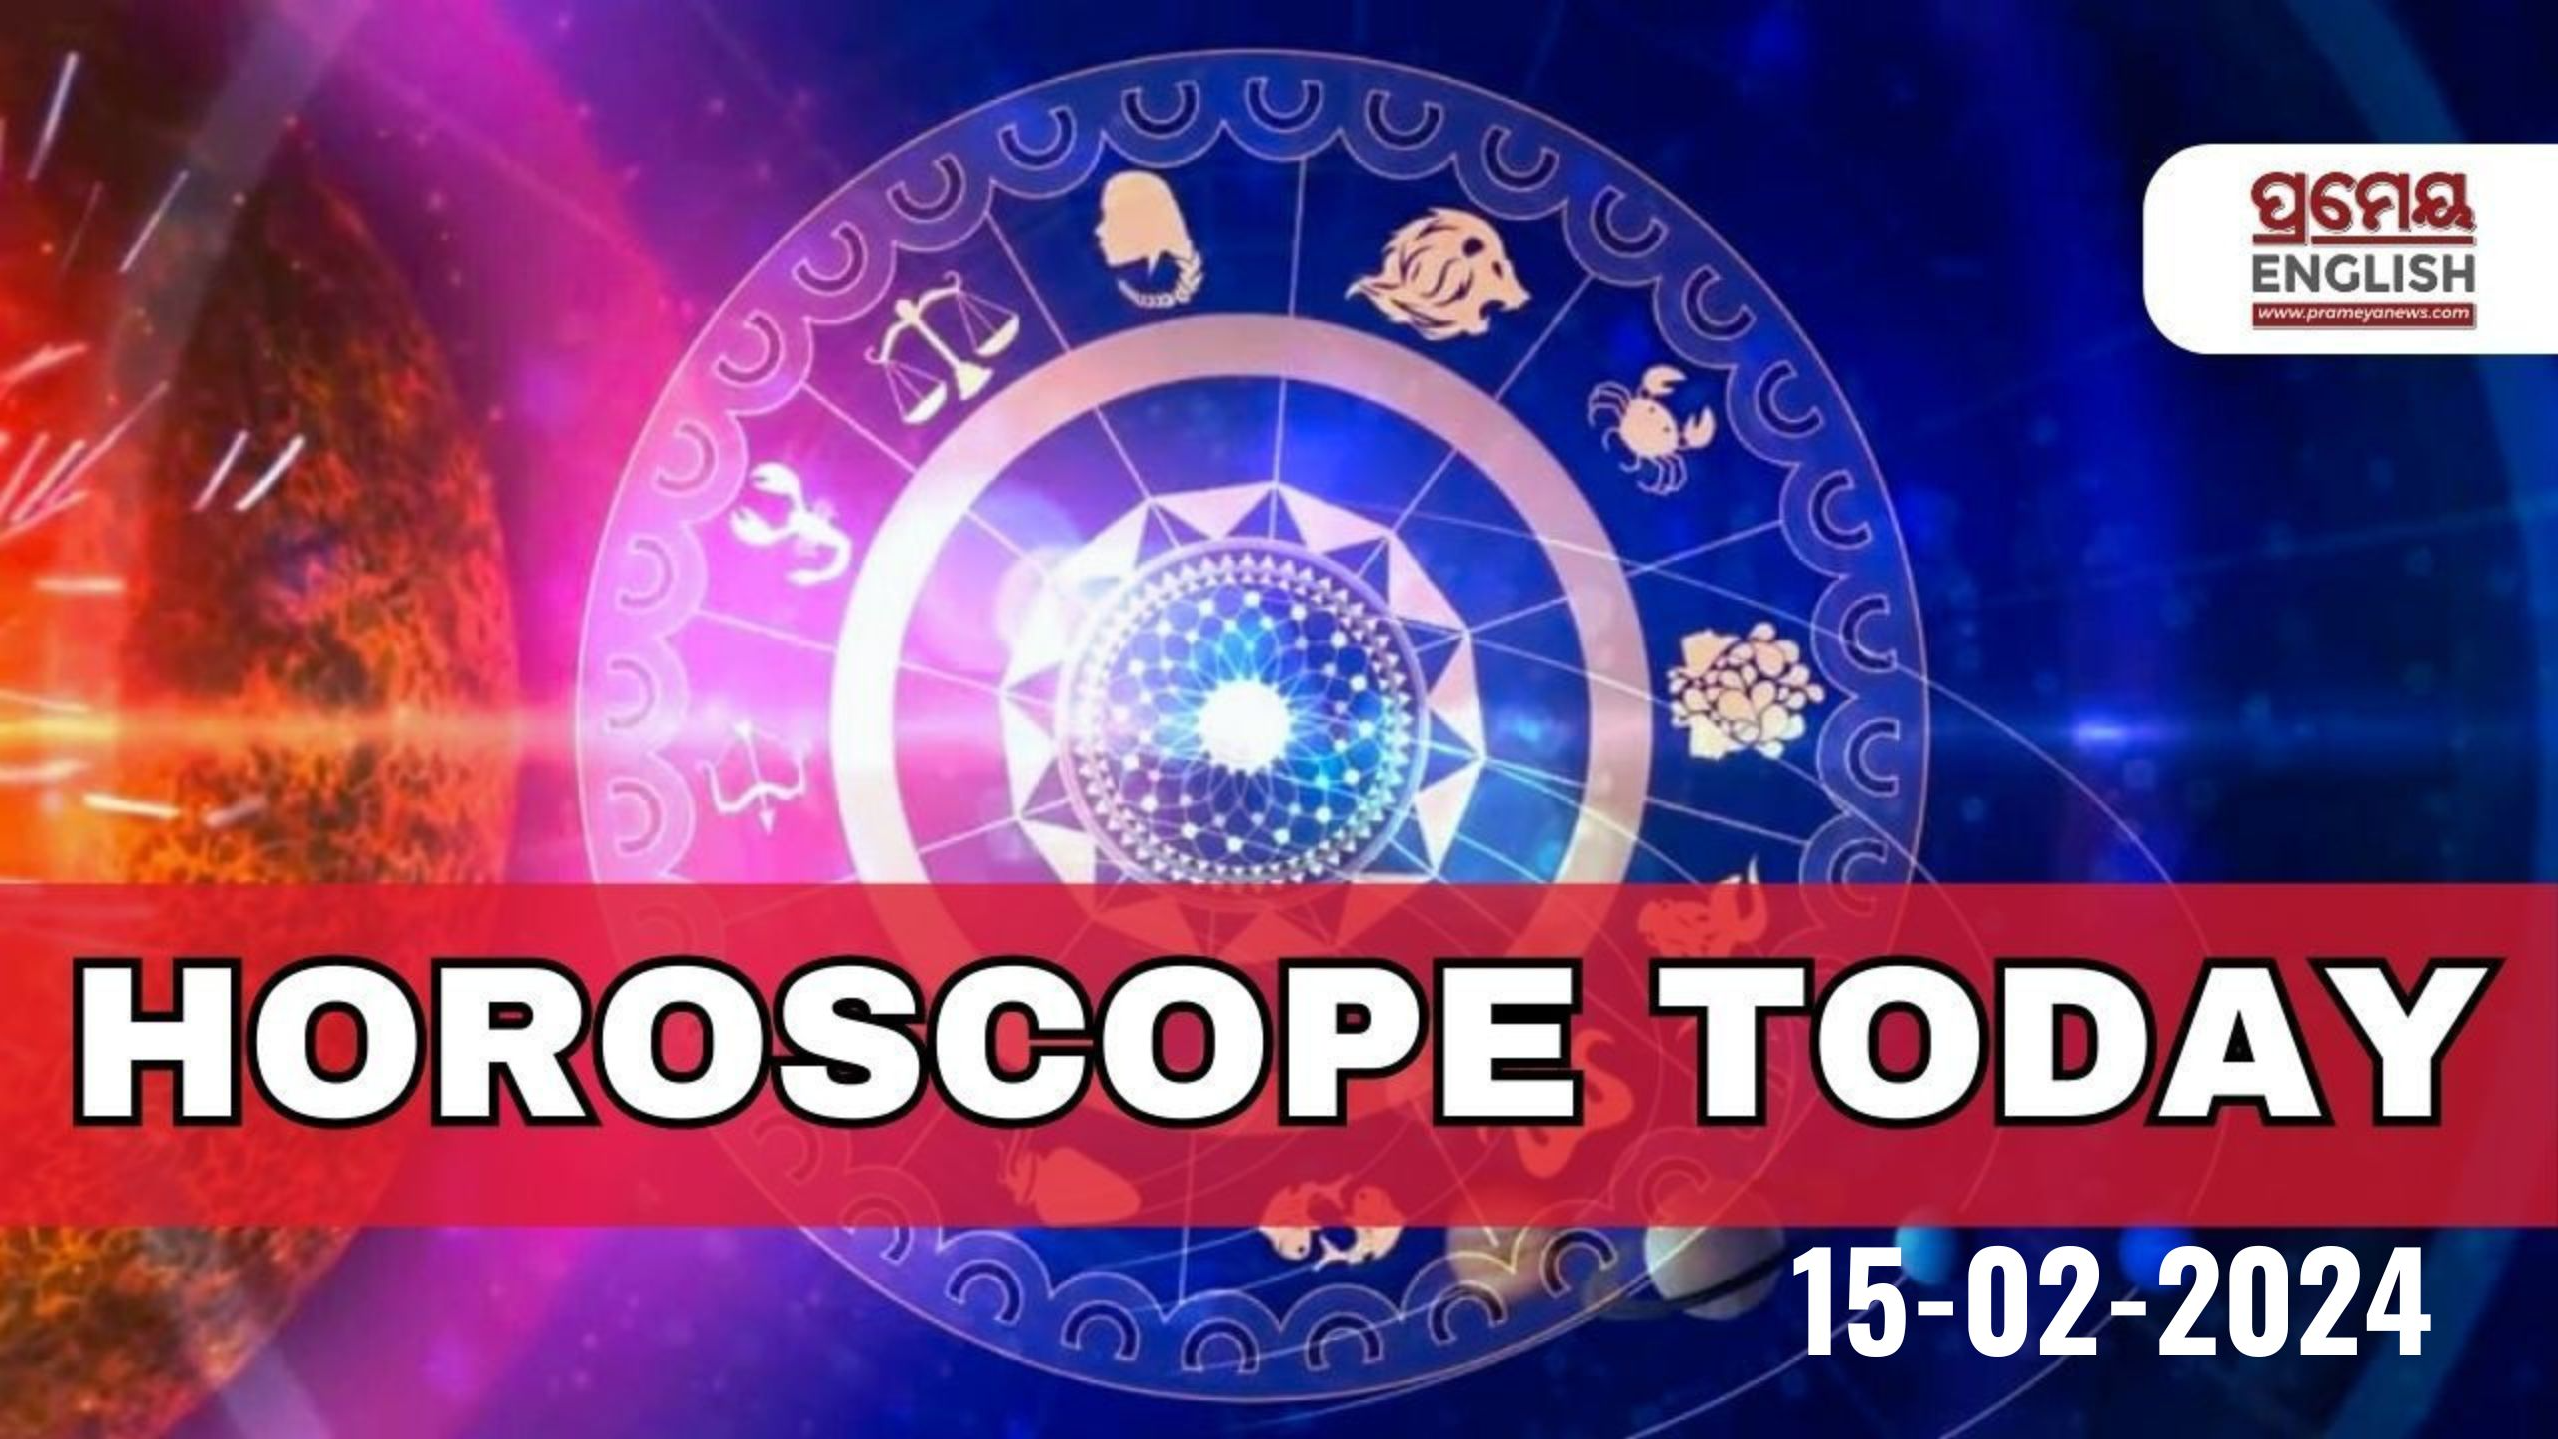 Horoscope Today: Astrological prediction for January 29, 2024